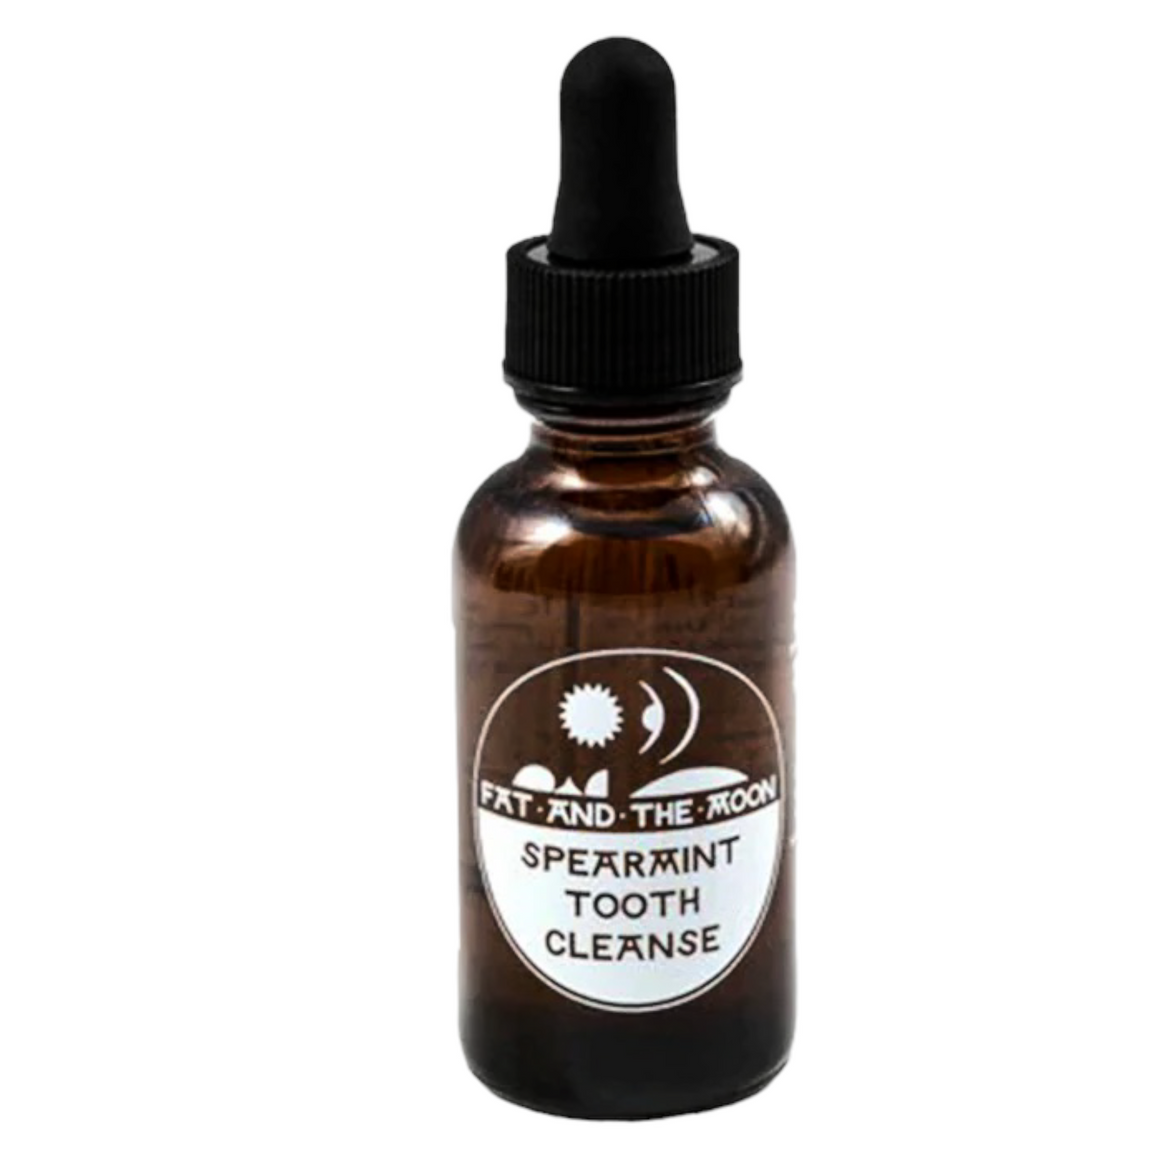 Spearmint Tooth Cleanse 1oz - Fat & The Moon